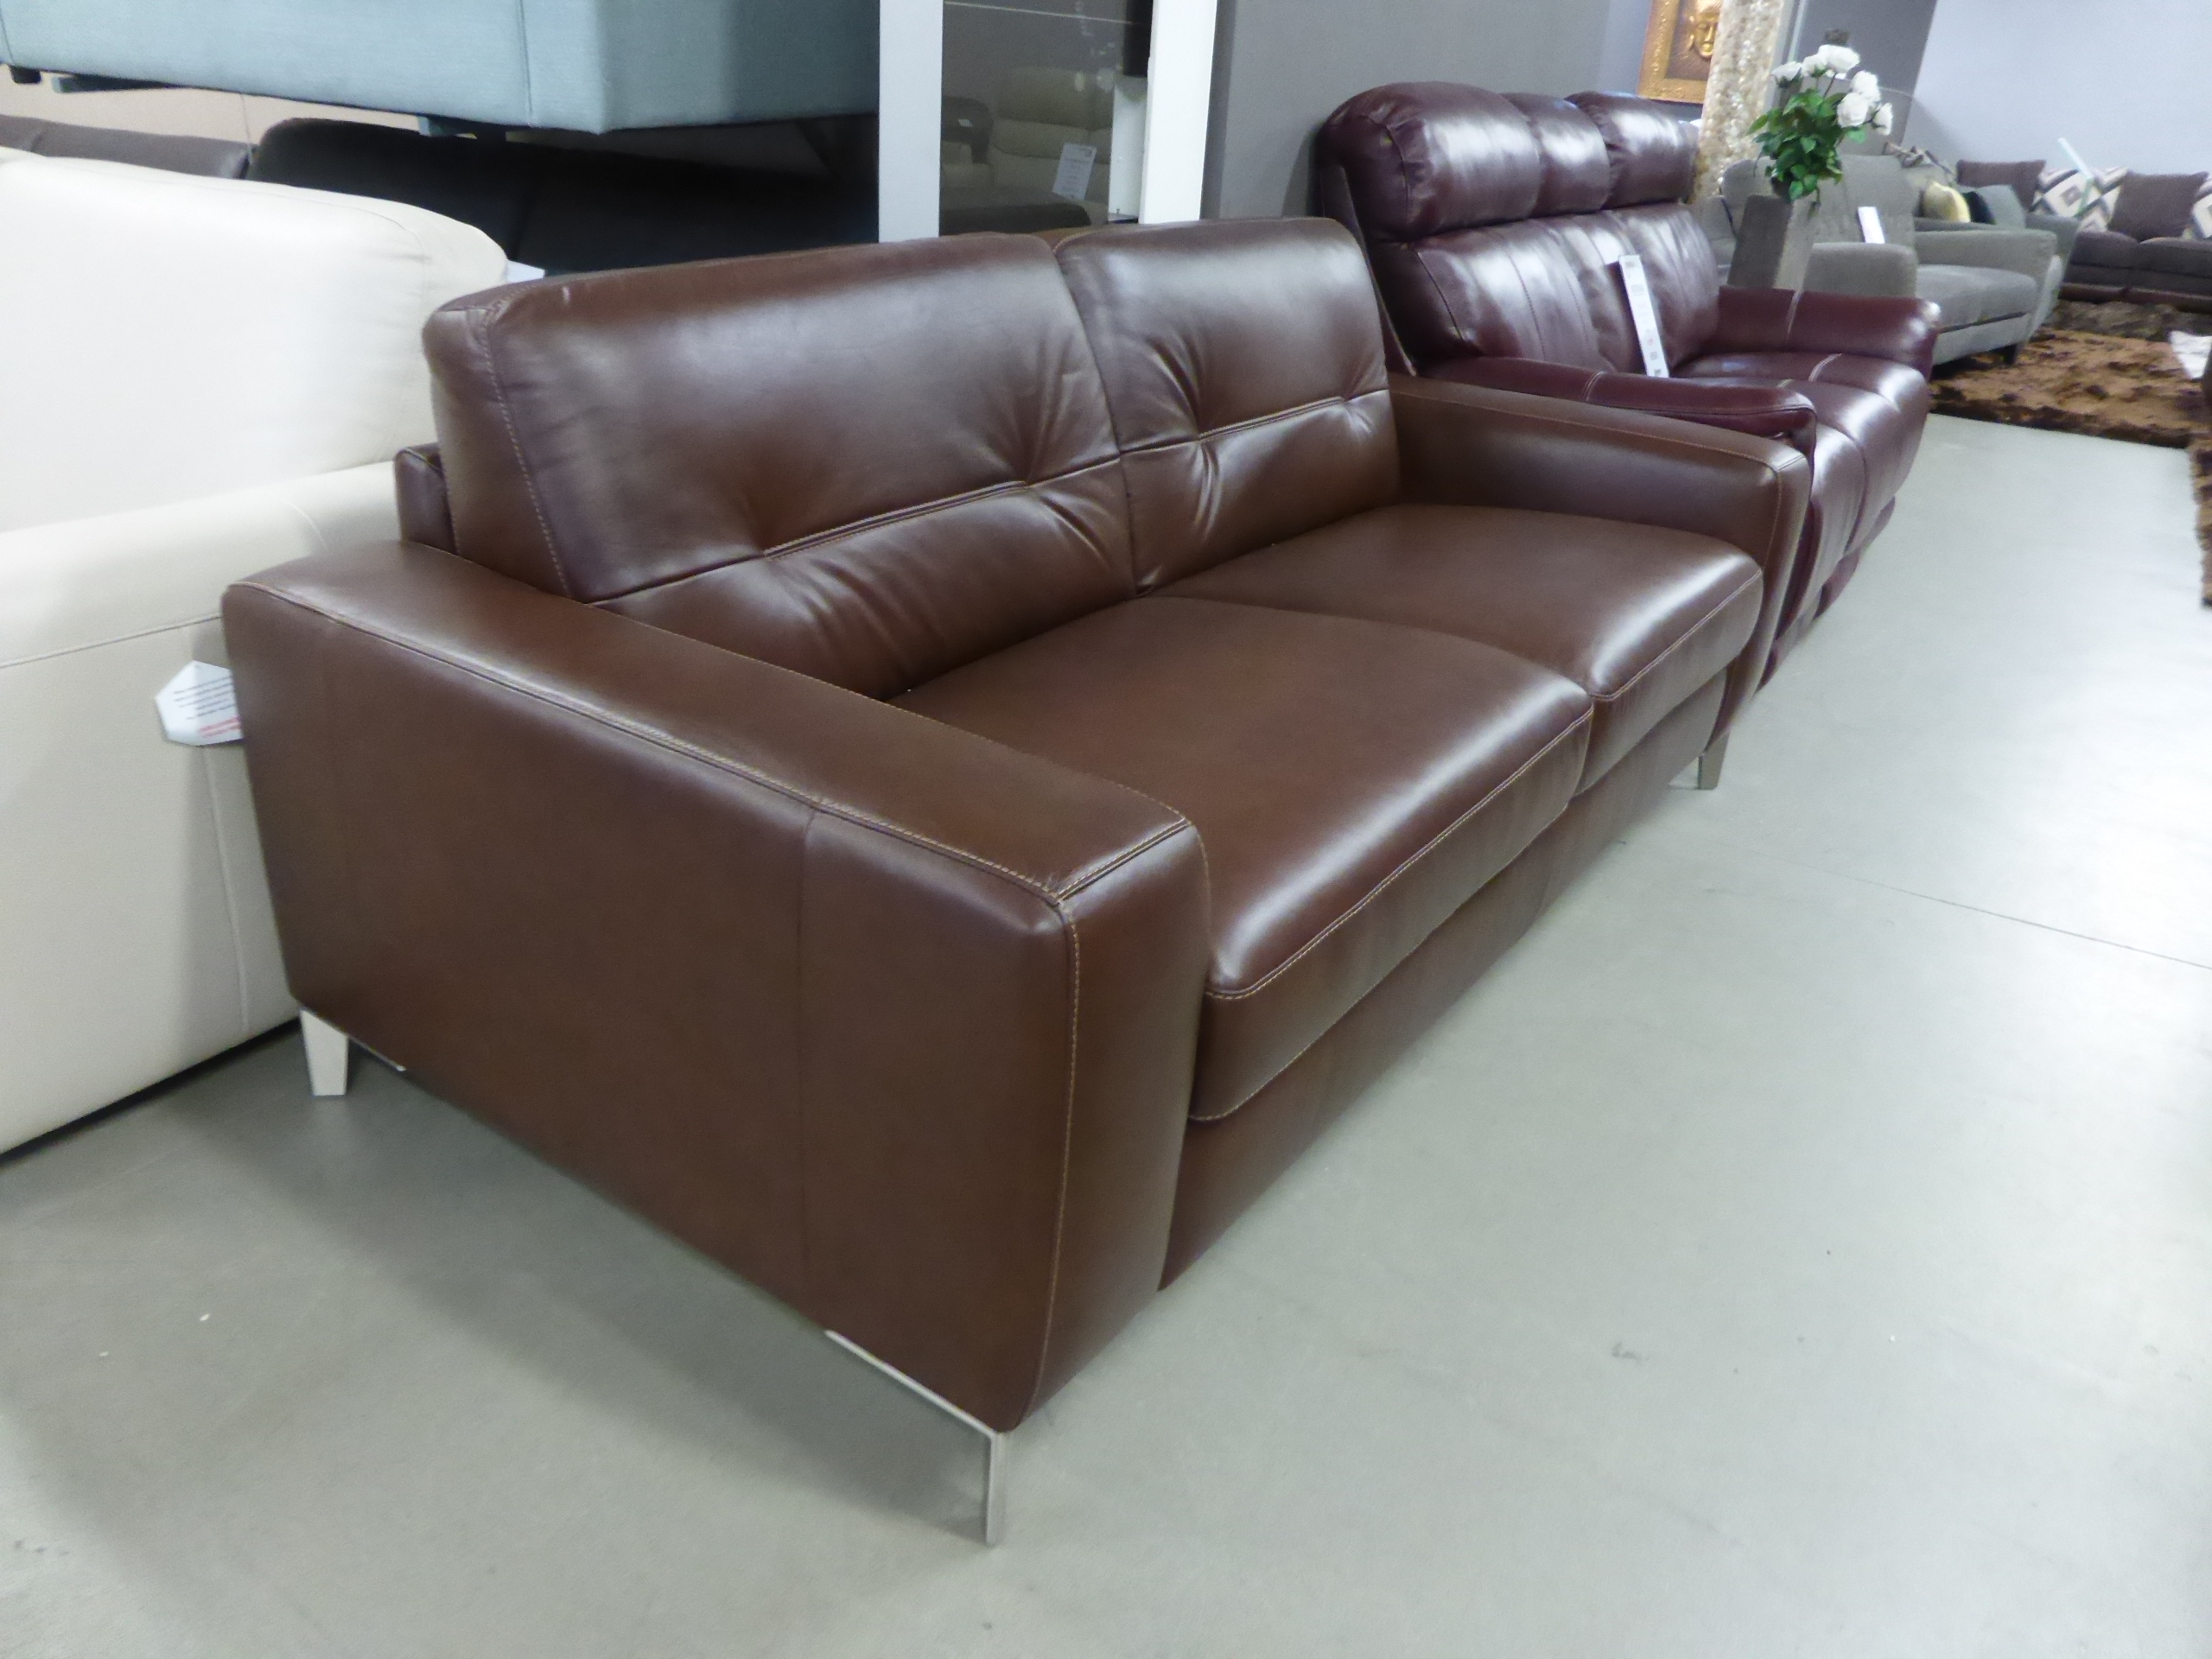 editions leather sofa bed